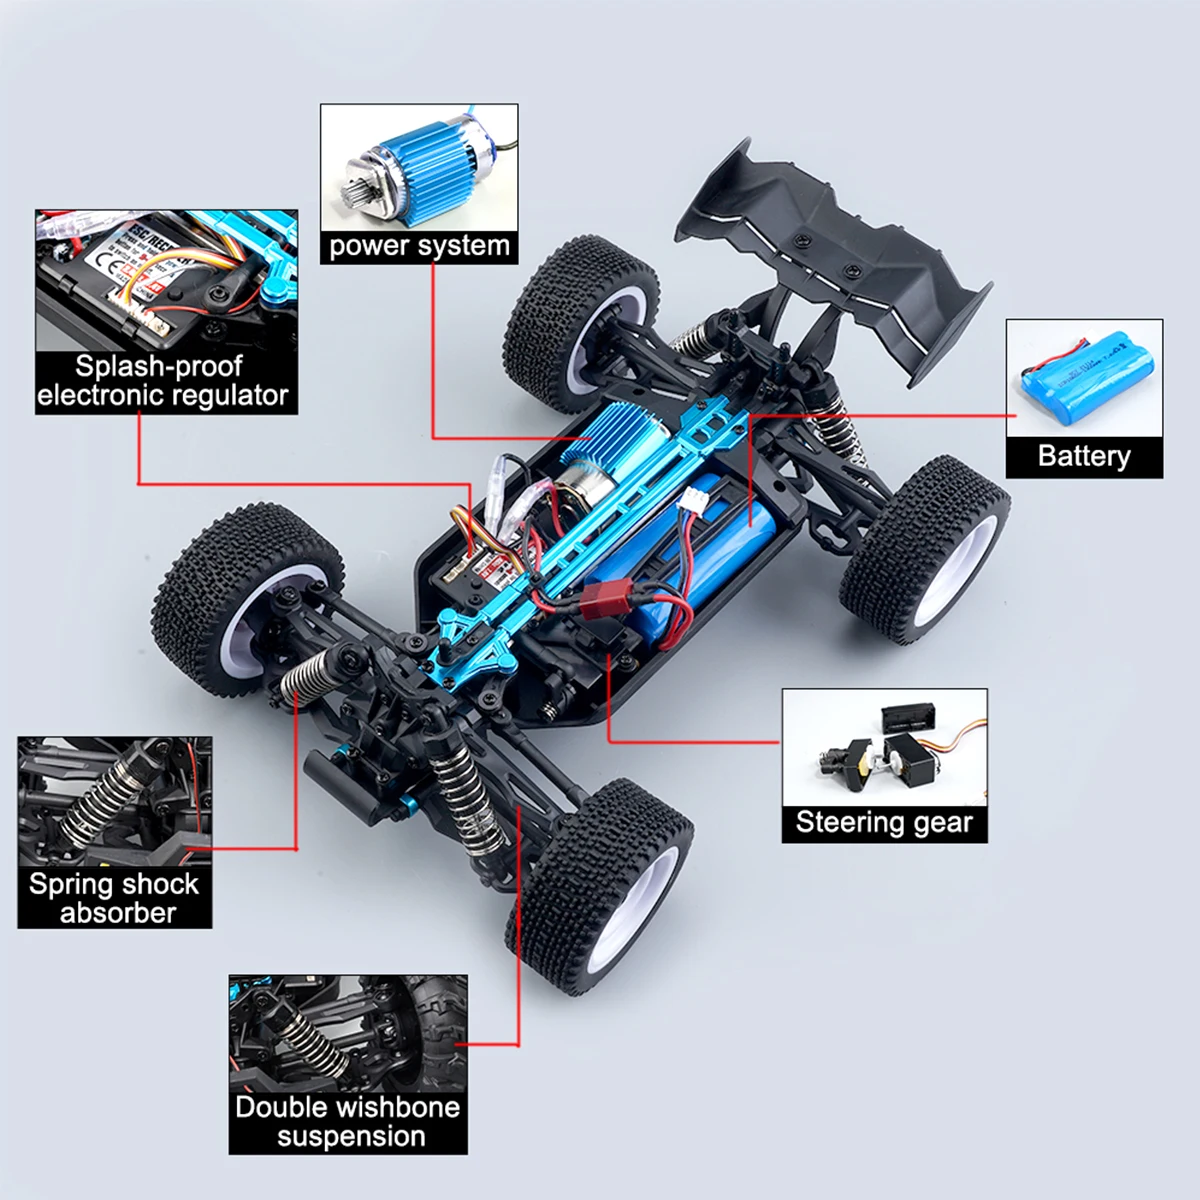 SCY-16201 Remote Control Car Drift 35km/h RC Racing Car High Speed Off-Road RC Car For Kids Gifts 1:16 RC Car enlarge